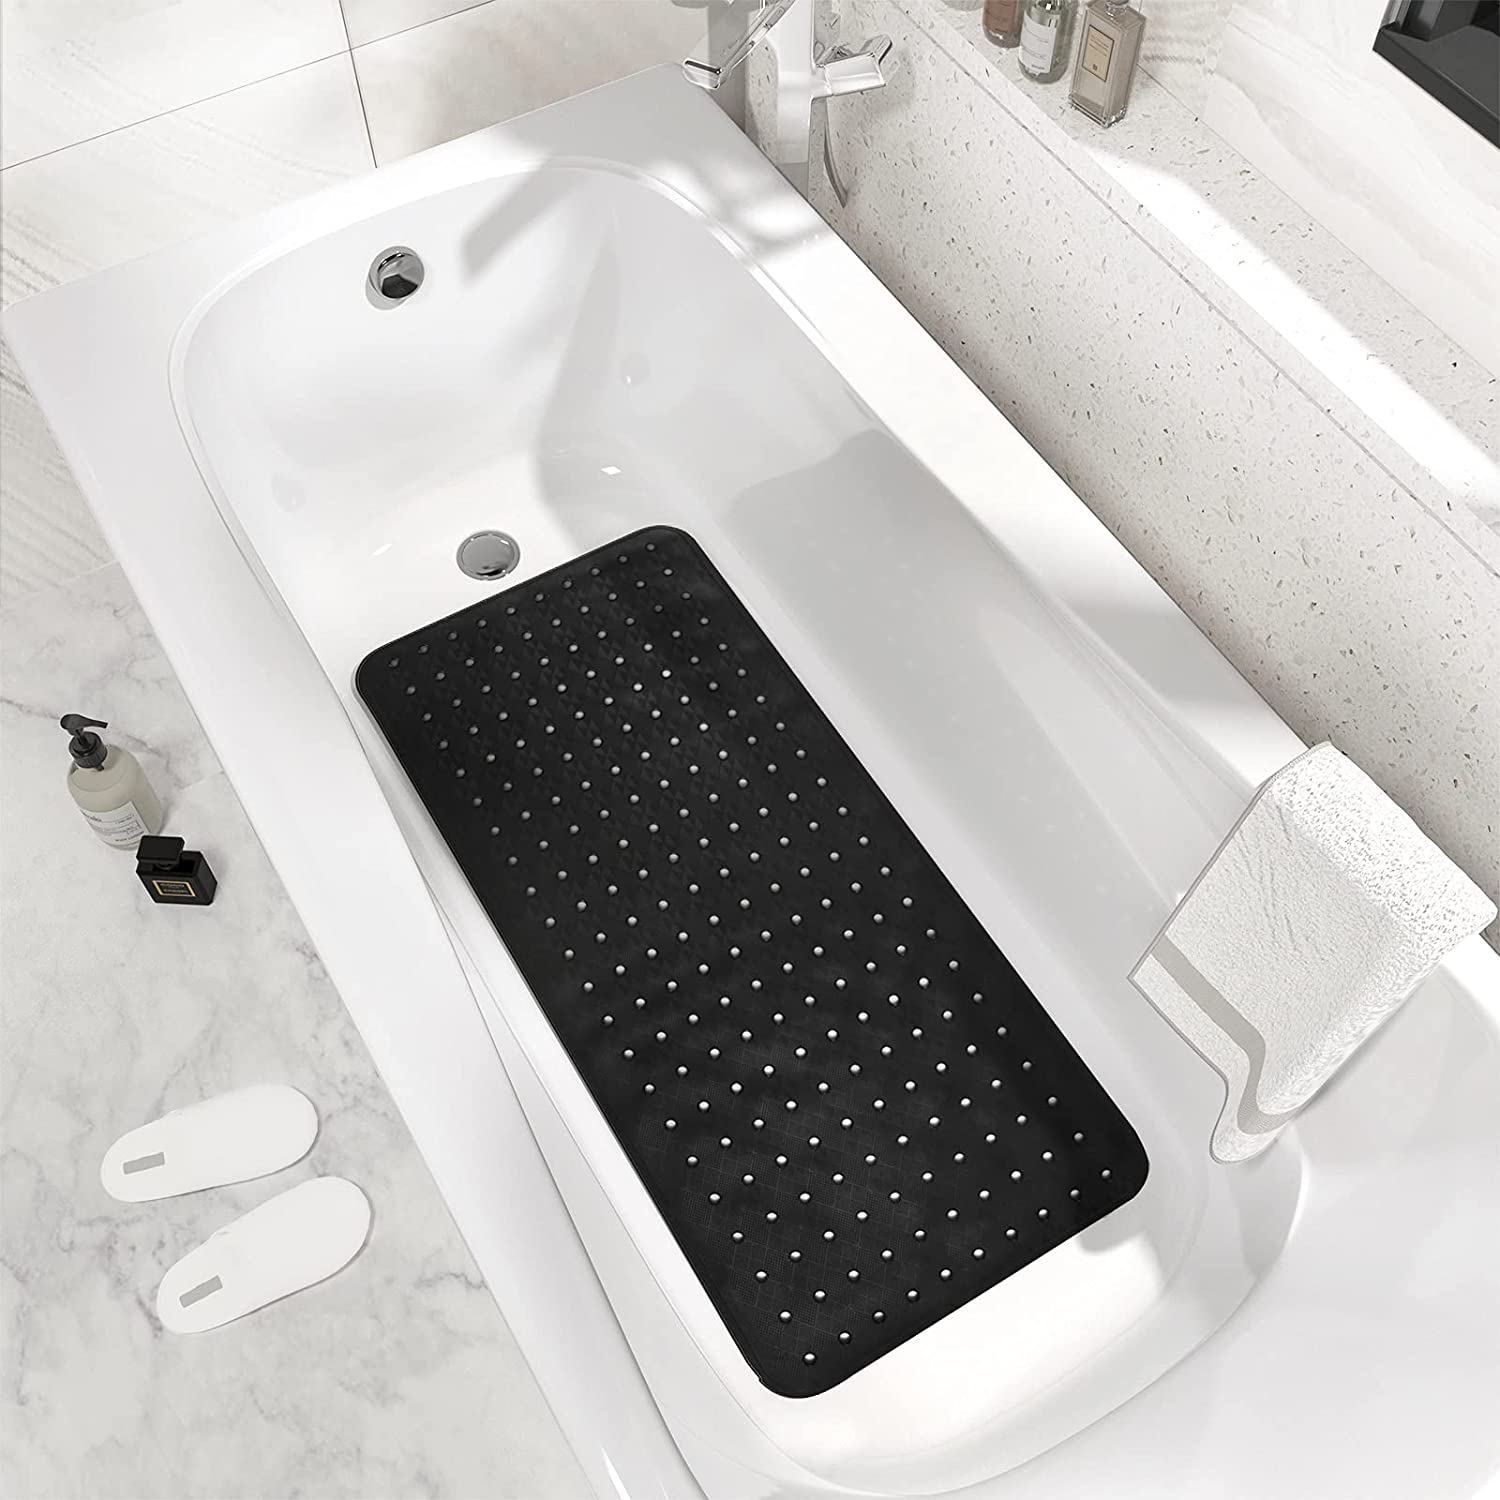 Clorox by Duck Brand Cushioned Foam Shower Mat, Non Slip Bathtub Mat with  Suction Cups, Fits Square Shower Stalls, 21' x 21, White